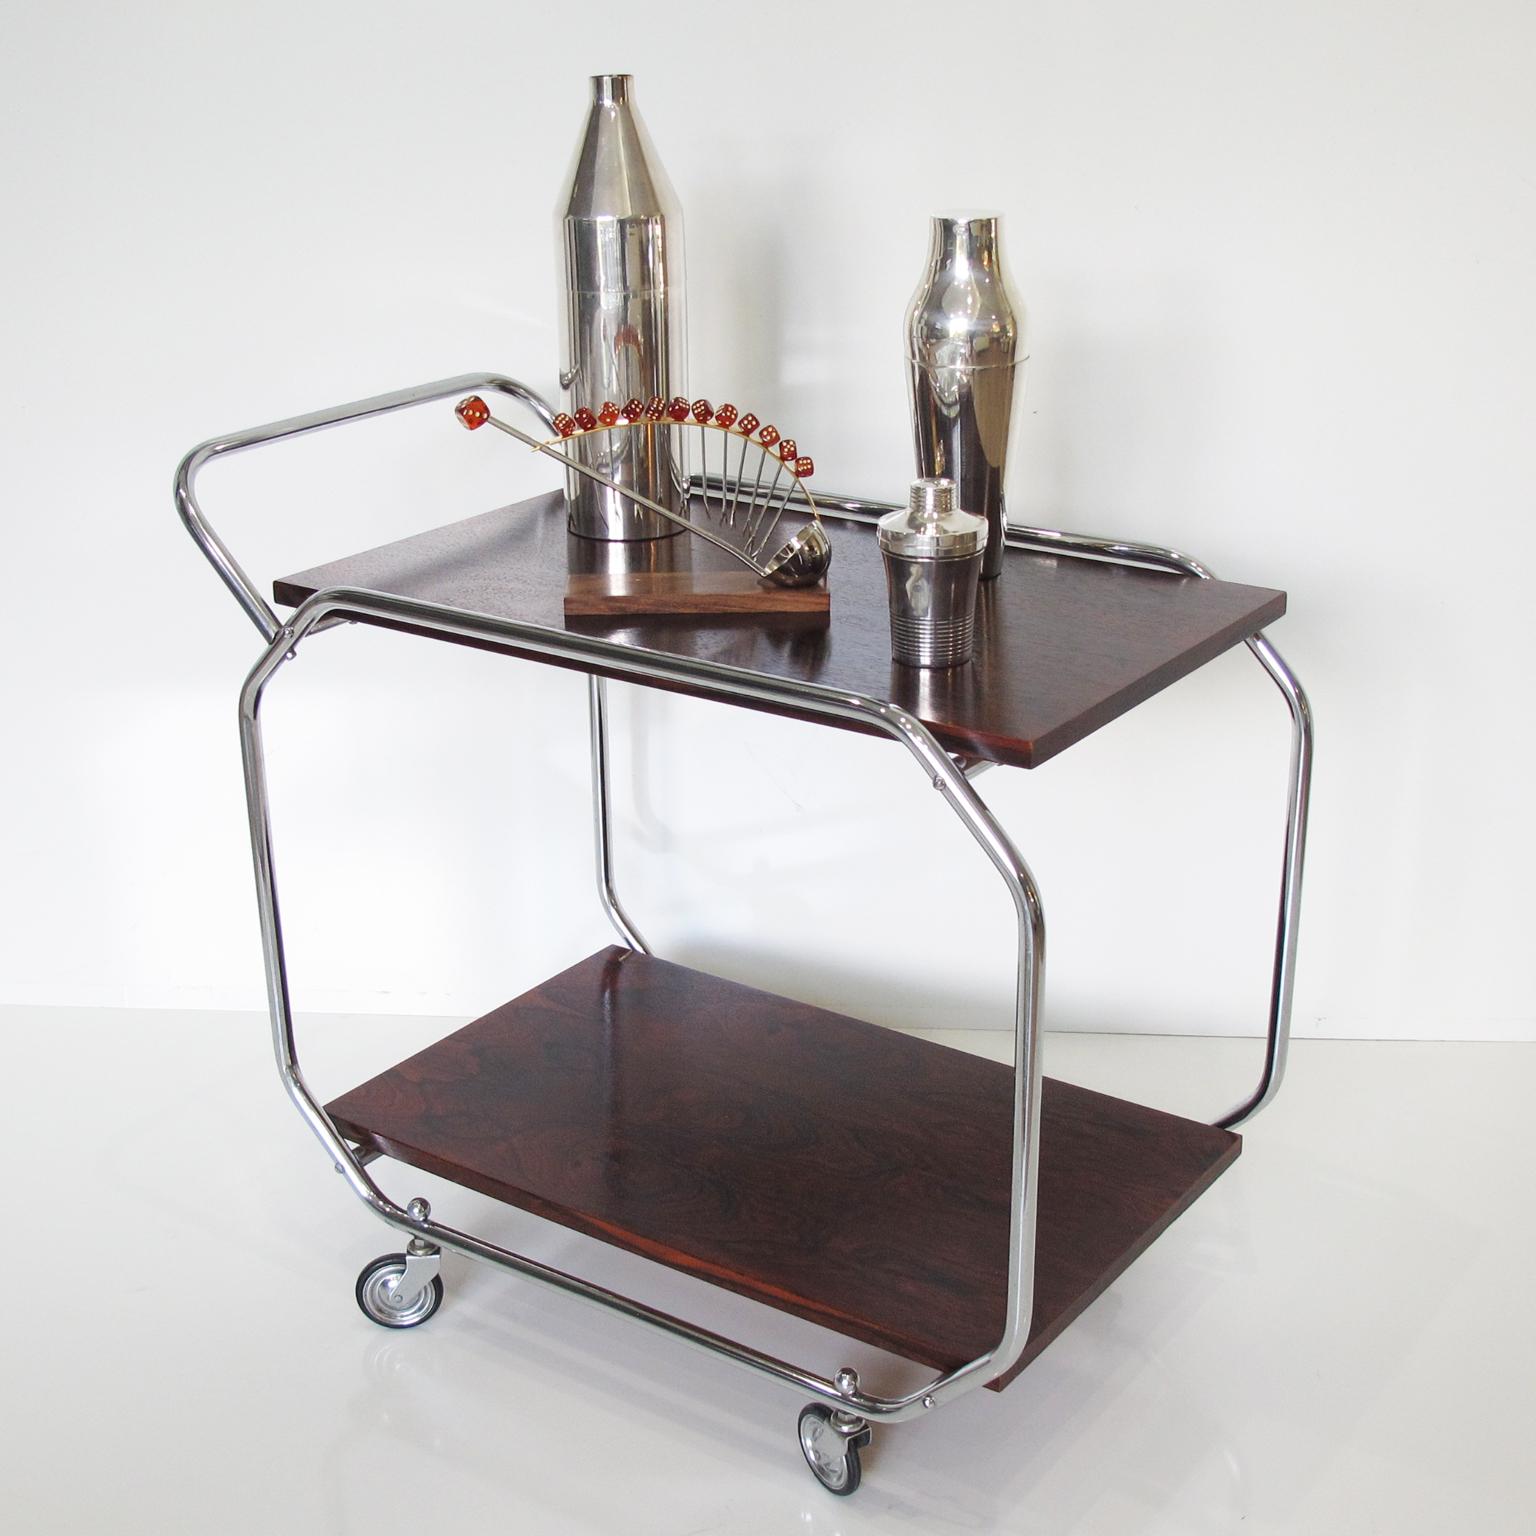 This striking, streamlined Art Deco rolling bar serving cart was designed with the influence of Bauhaus Modernism. This bar accessory features a chromed metal round tubing frame with wood upper and lower shelves. The piece boasts a sturdy chrome